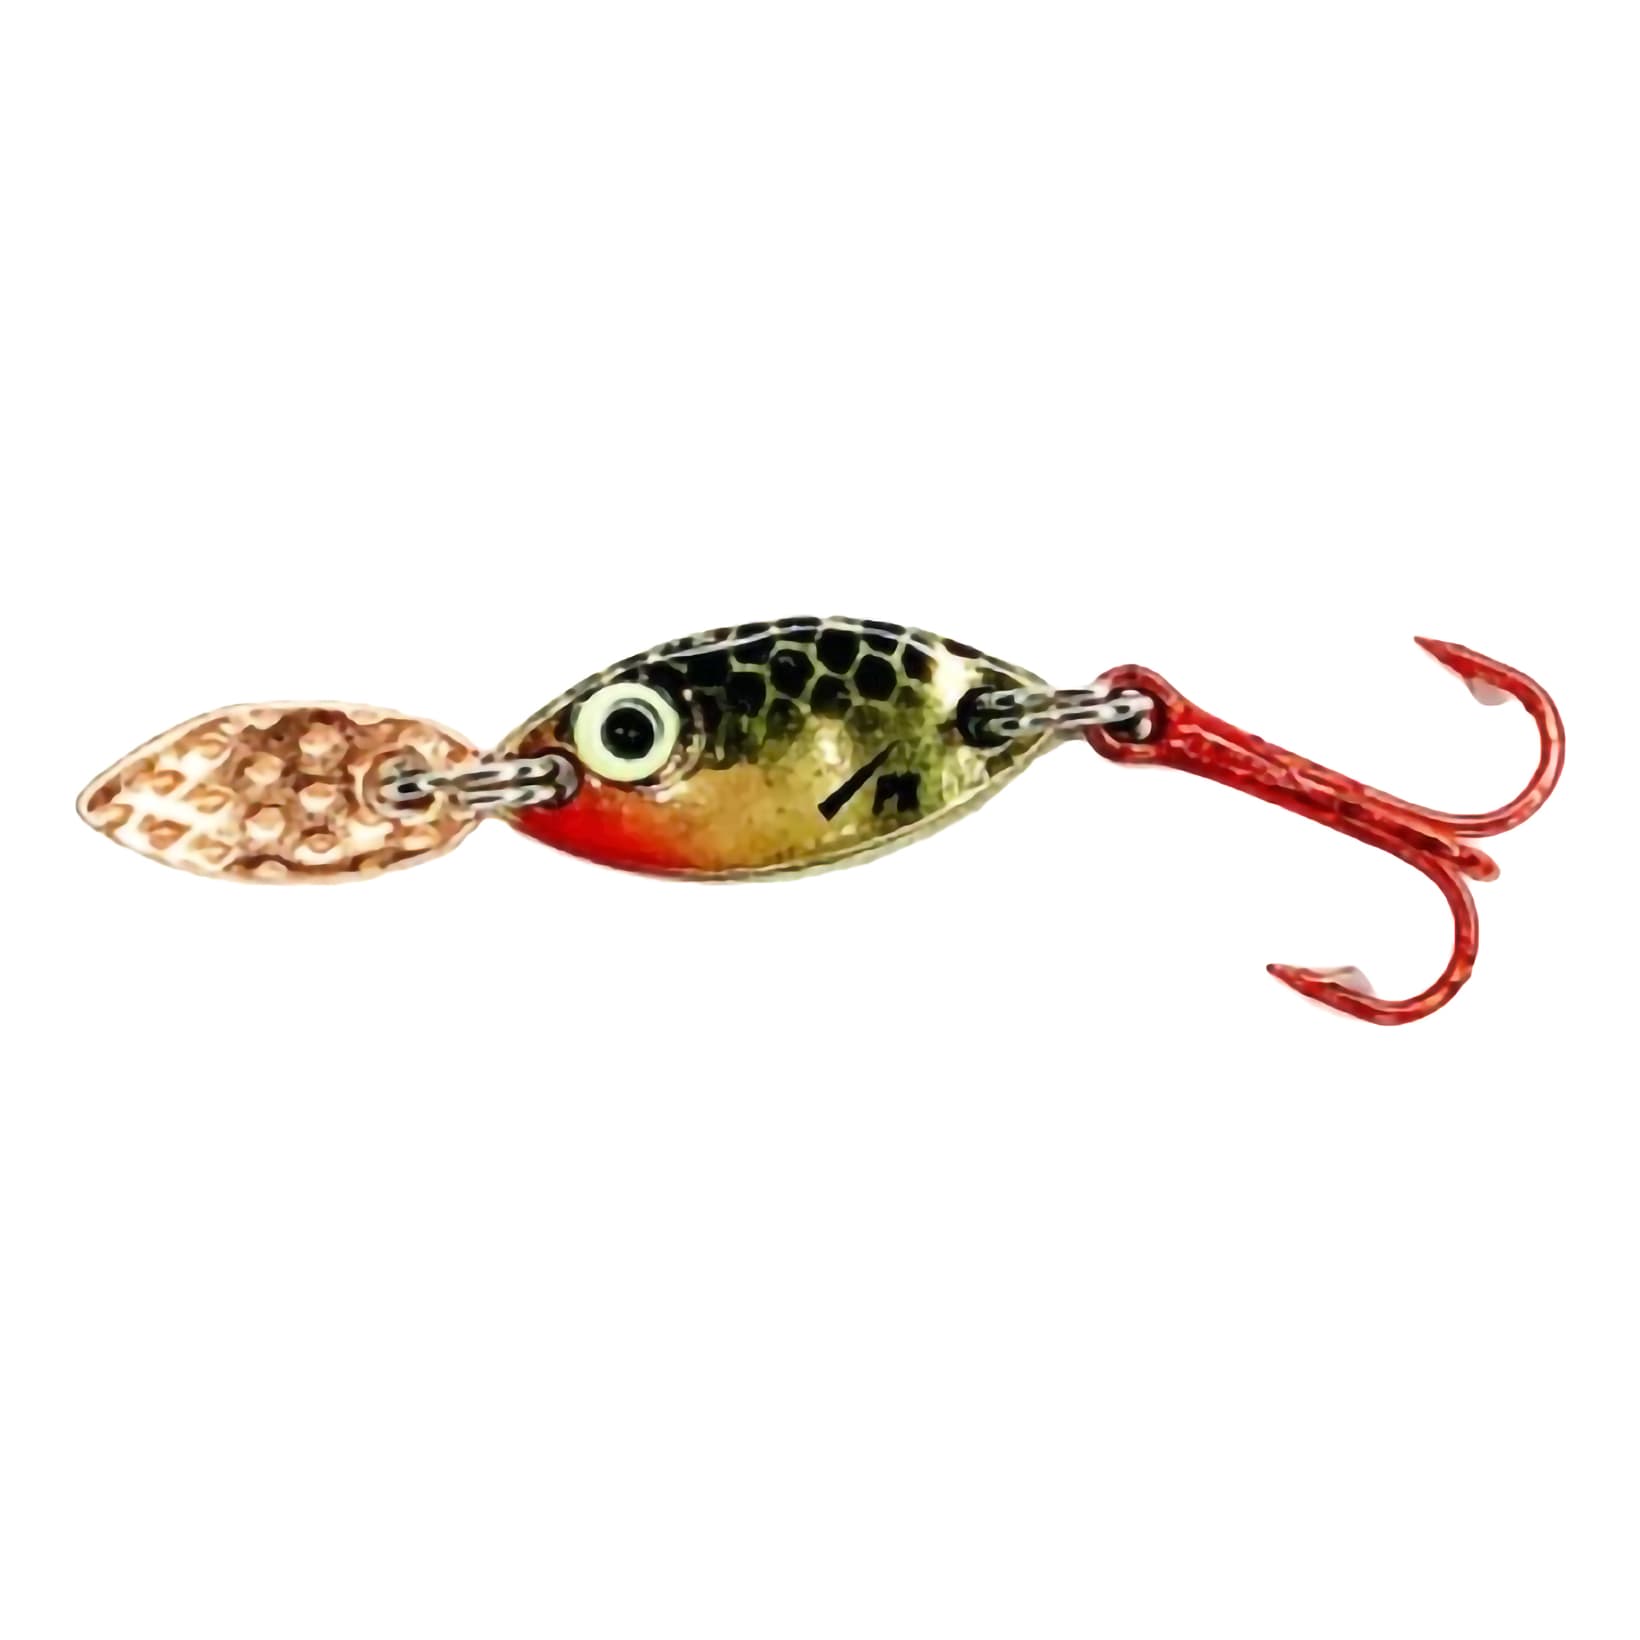 PK Spoon Single Treble in Red Tiger Glow, Size 1/8 Oz from The Fishin' Hole